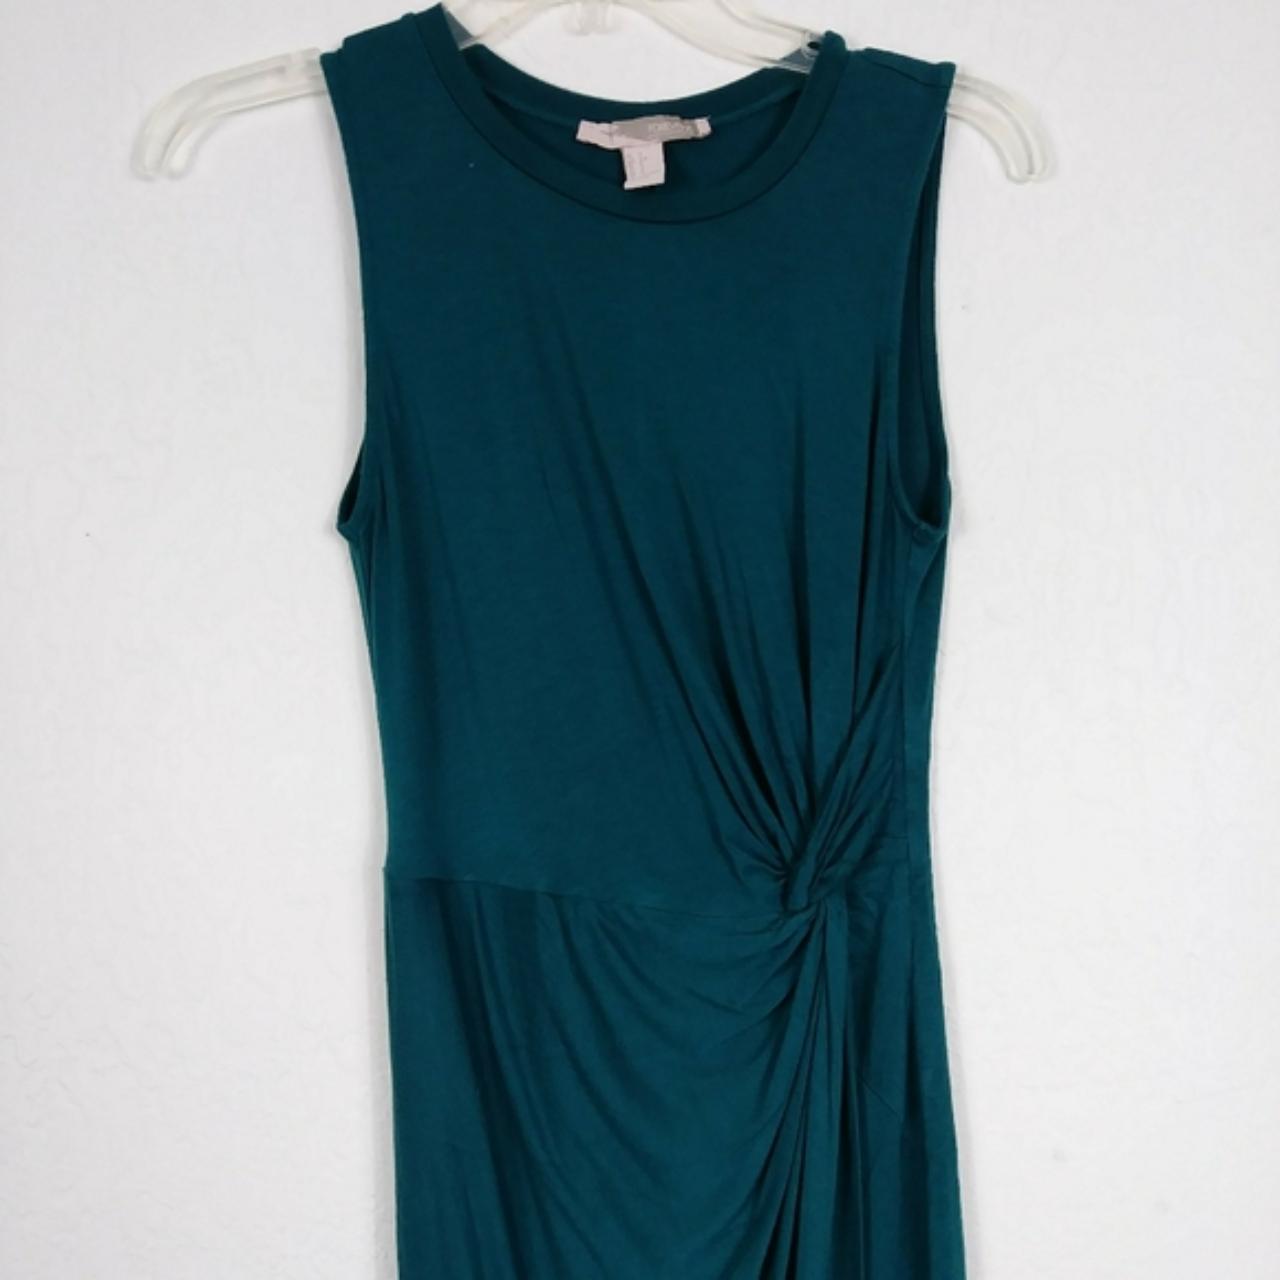 Forever 21 Women's Blue and Green Dress (2)